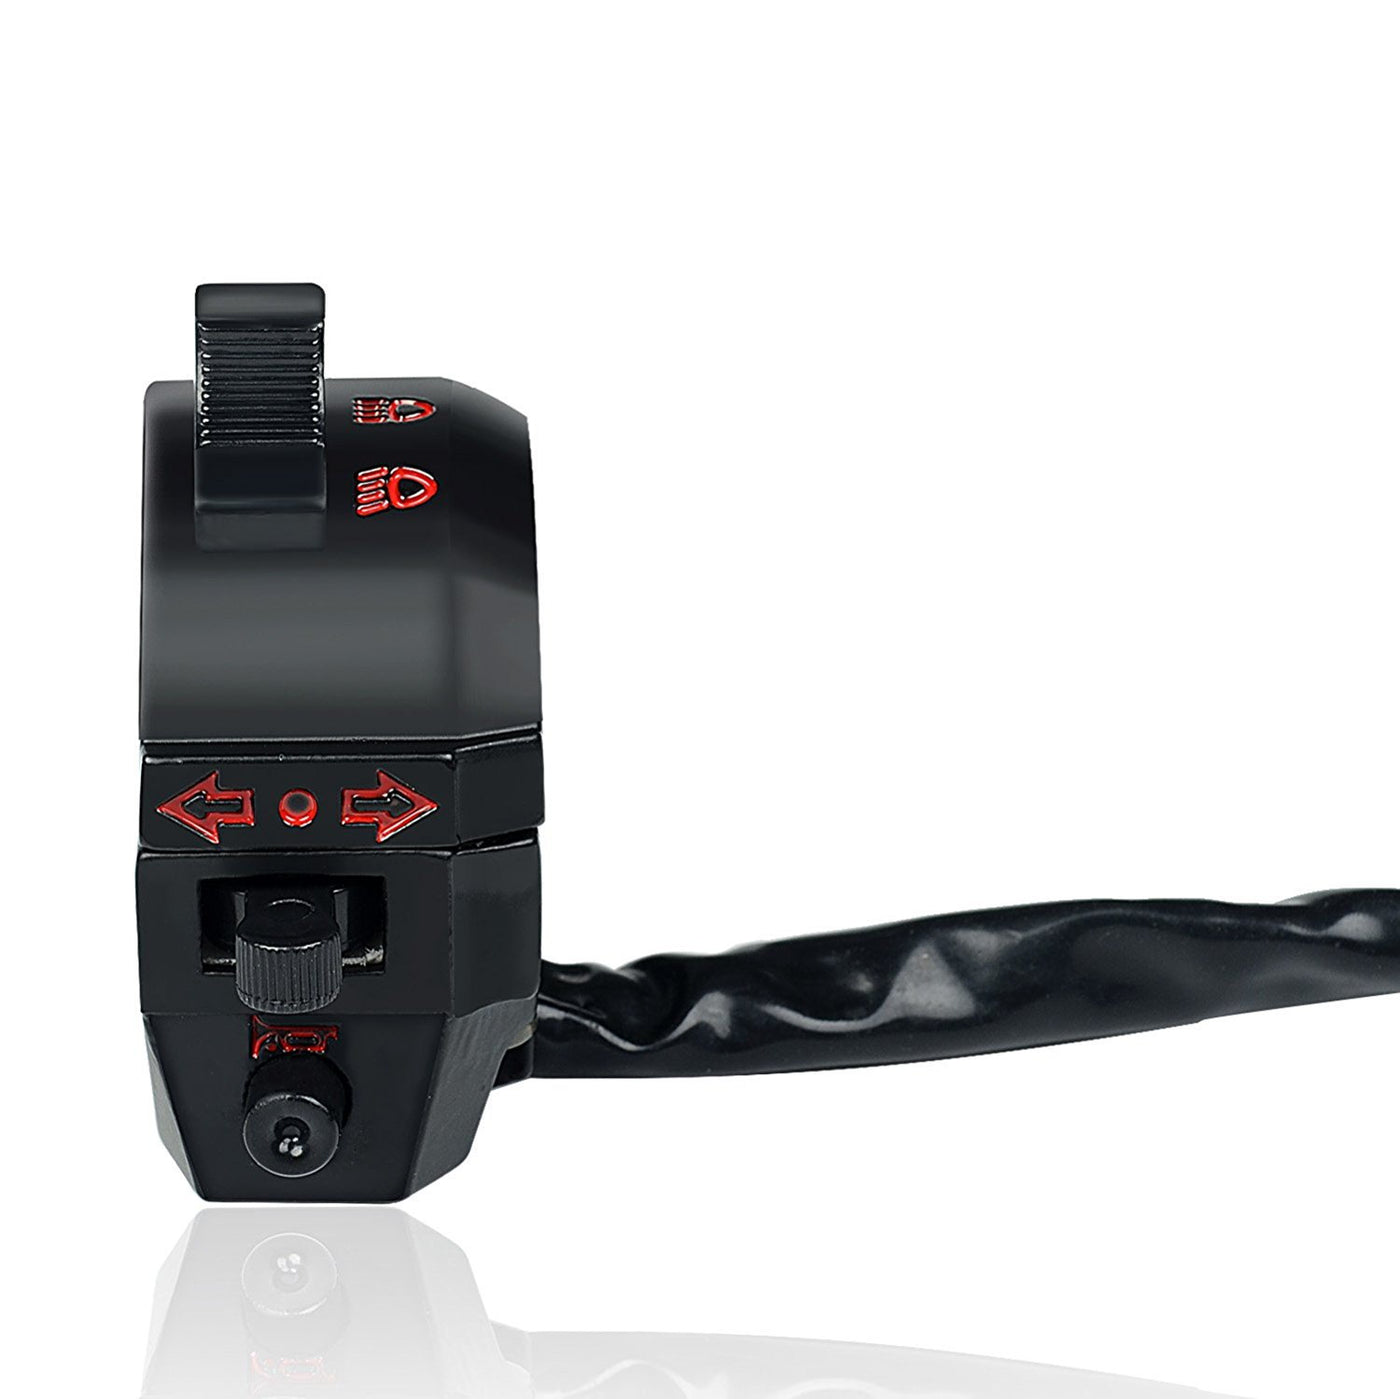 A black and red Moto Iron® Universal Compact Handlebar Multi-Switch for 7/8" Bars (hi/lo beam, turn signal, horn) with a red button.